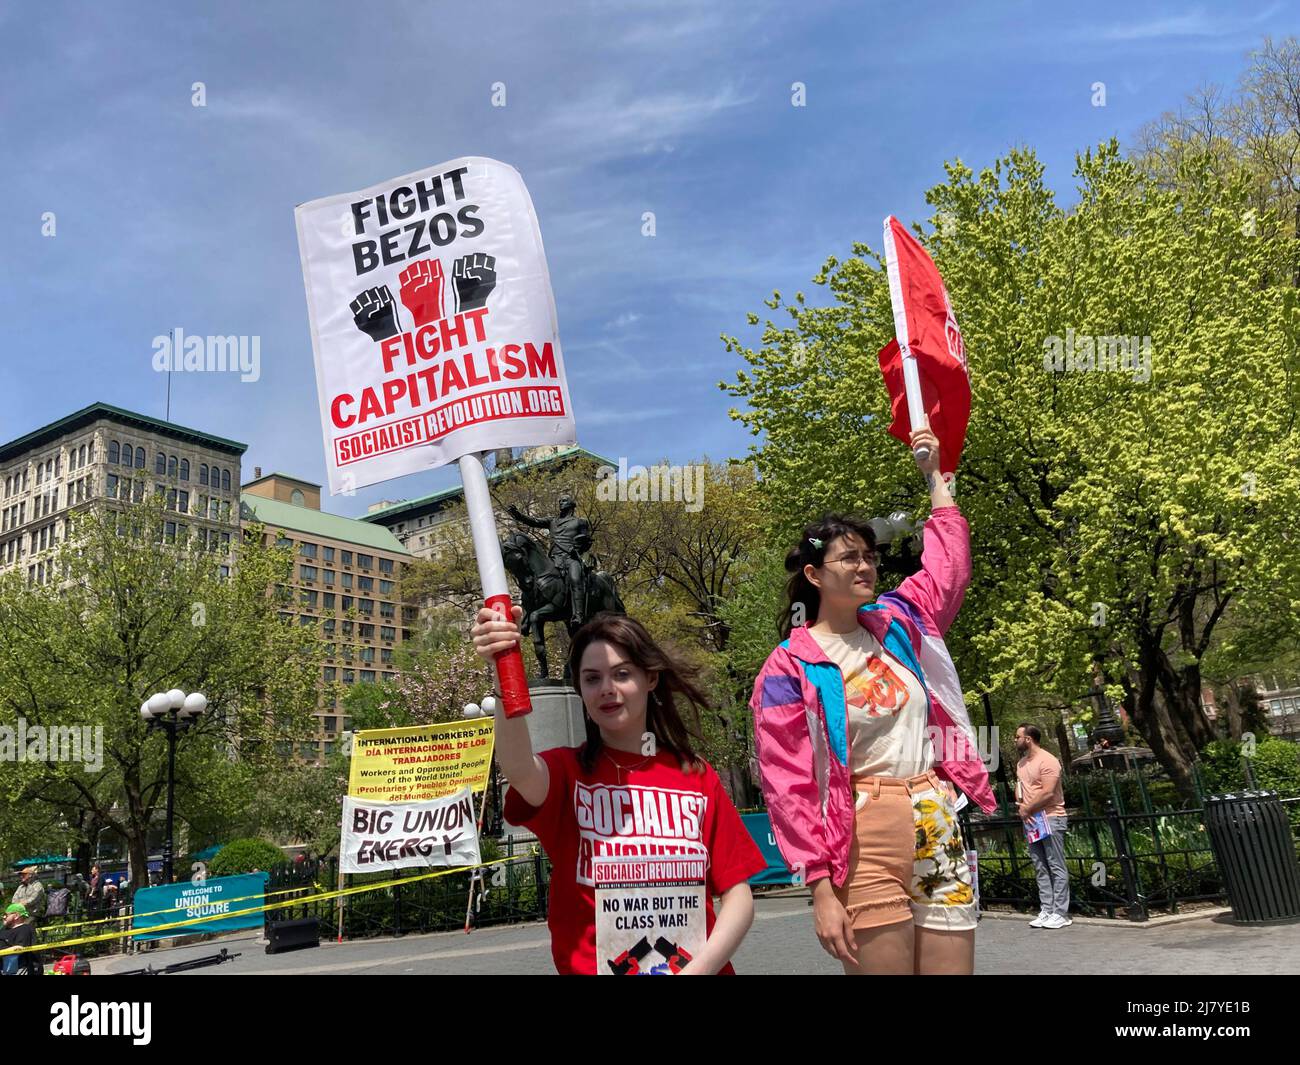 Activists rally in Union Square Park in New York on May Day, Sunday, May 1, 2022. Members of numerous groups rallied their support for unionization and against corporate attacks on workers.  (© Frances M. Roberts) Stock Photo